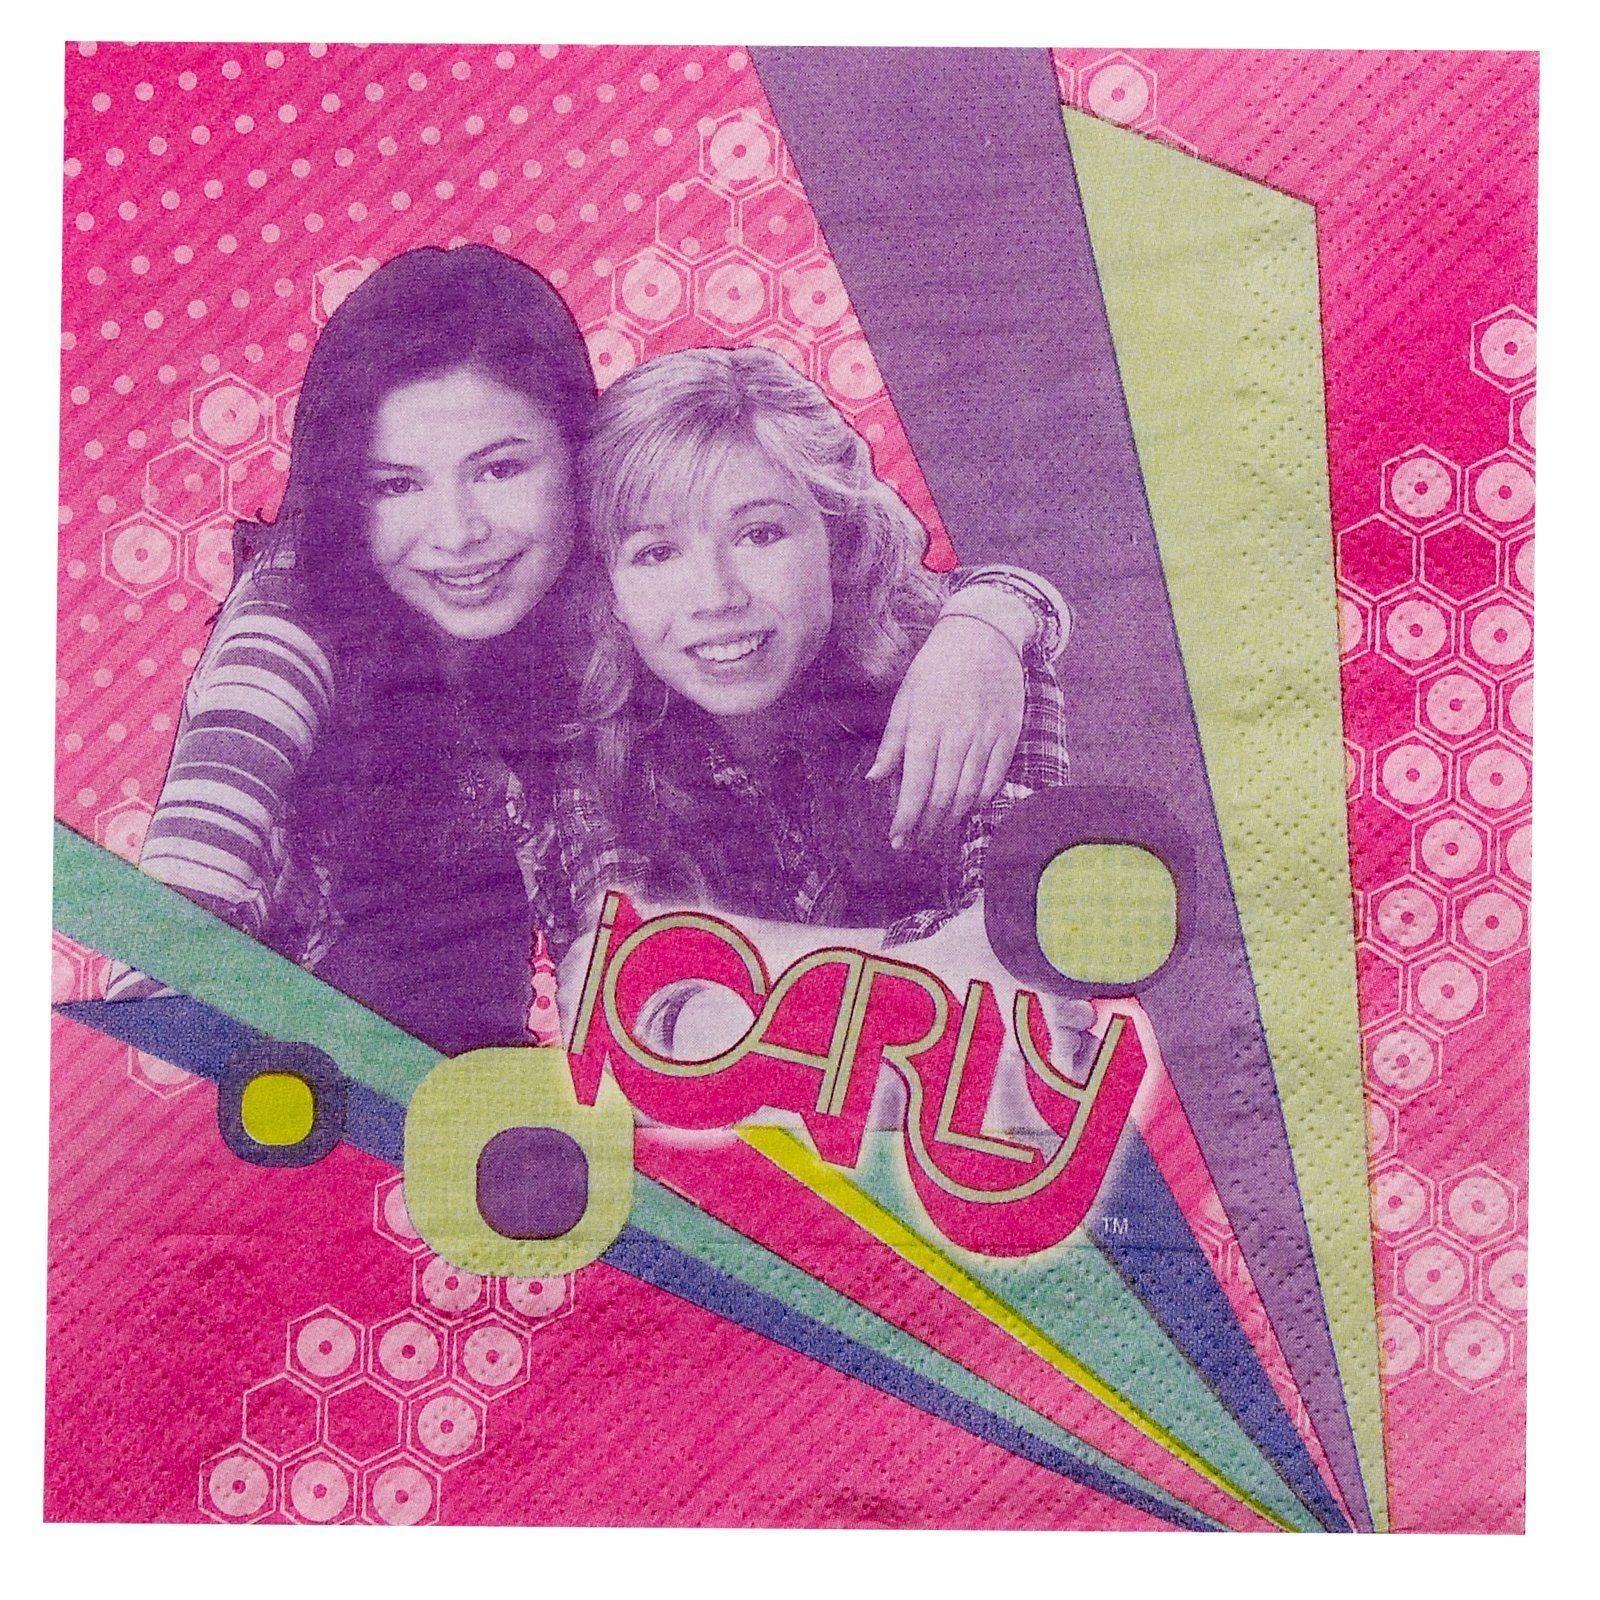 Icarly Cast Miranda Cosgrove Jennette Mccurdy Nathan Kress And Noah